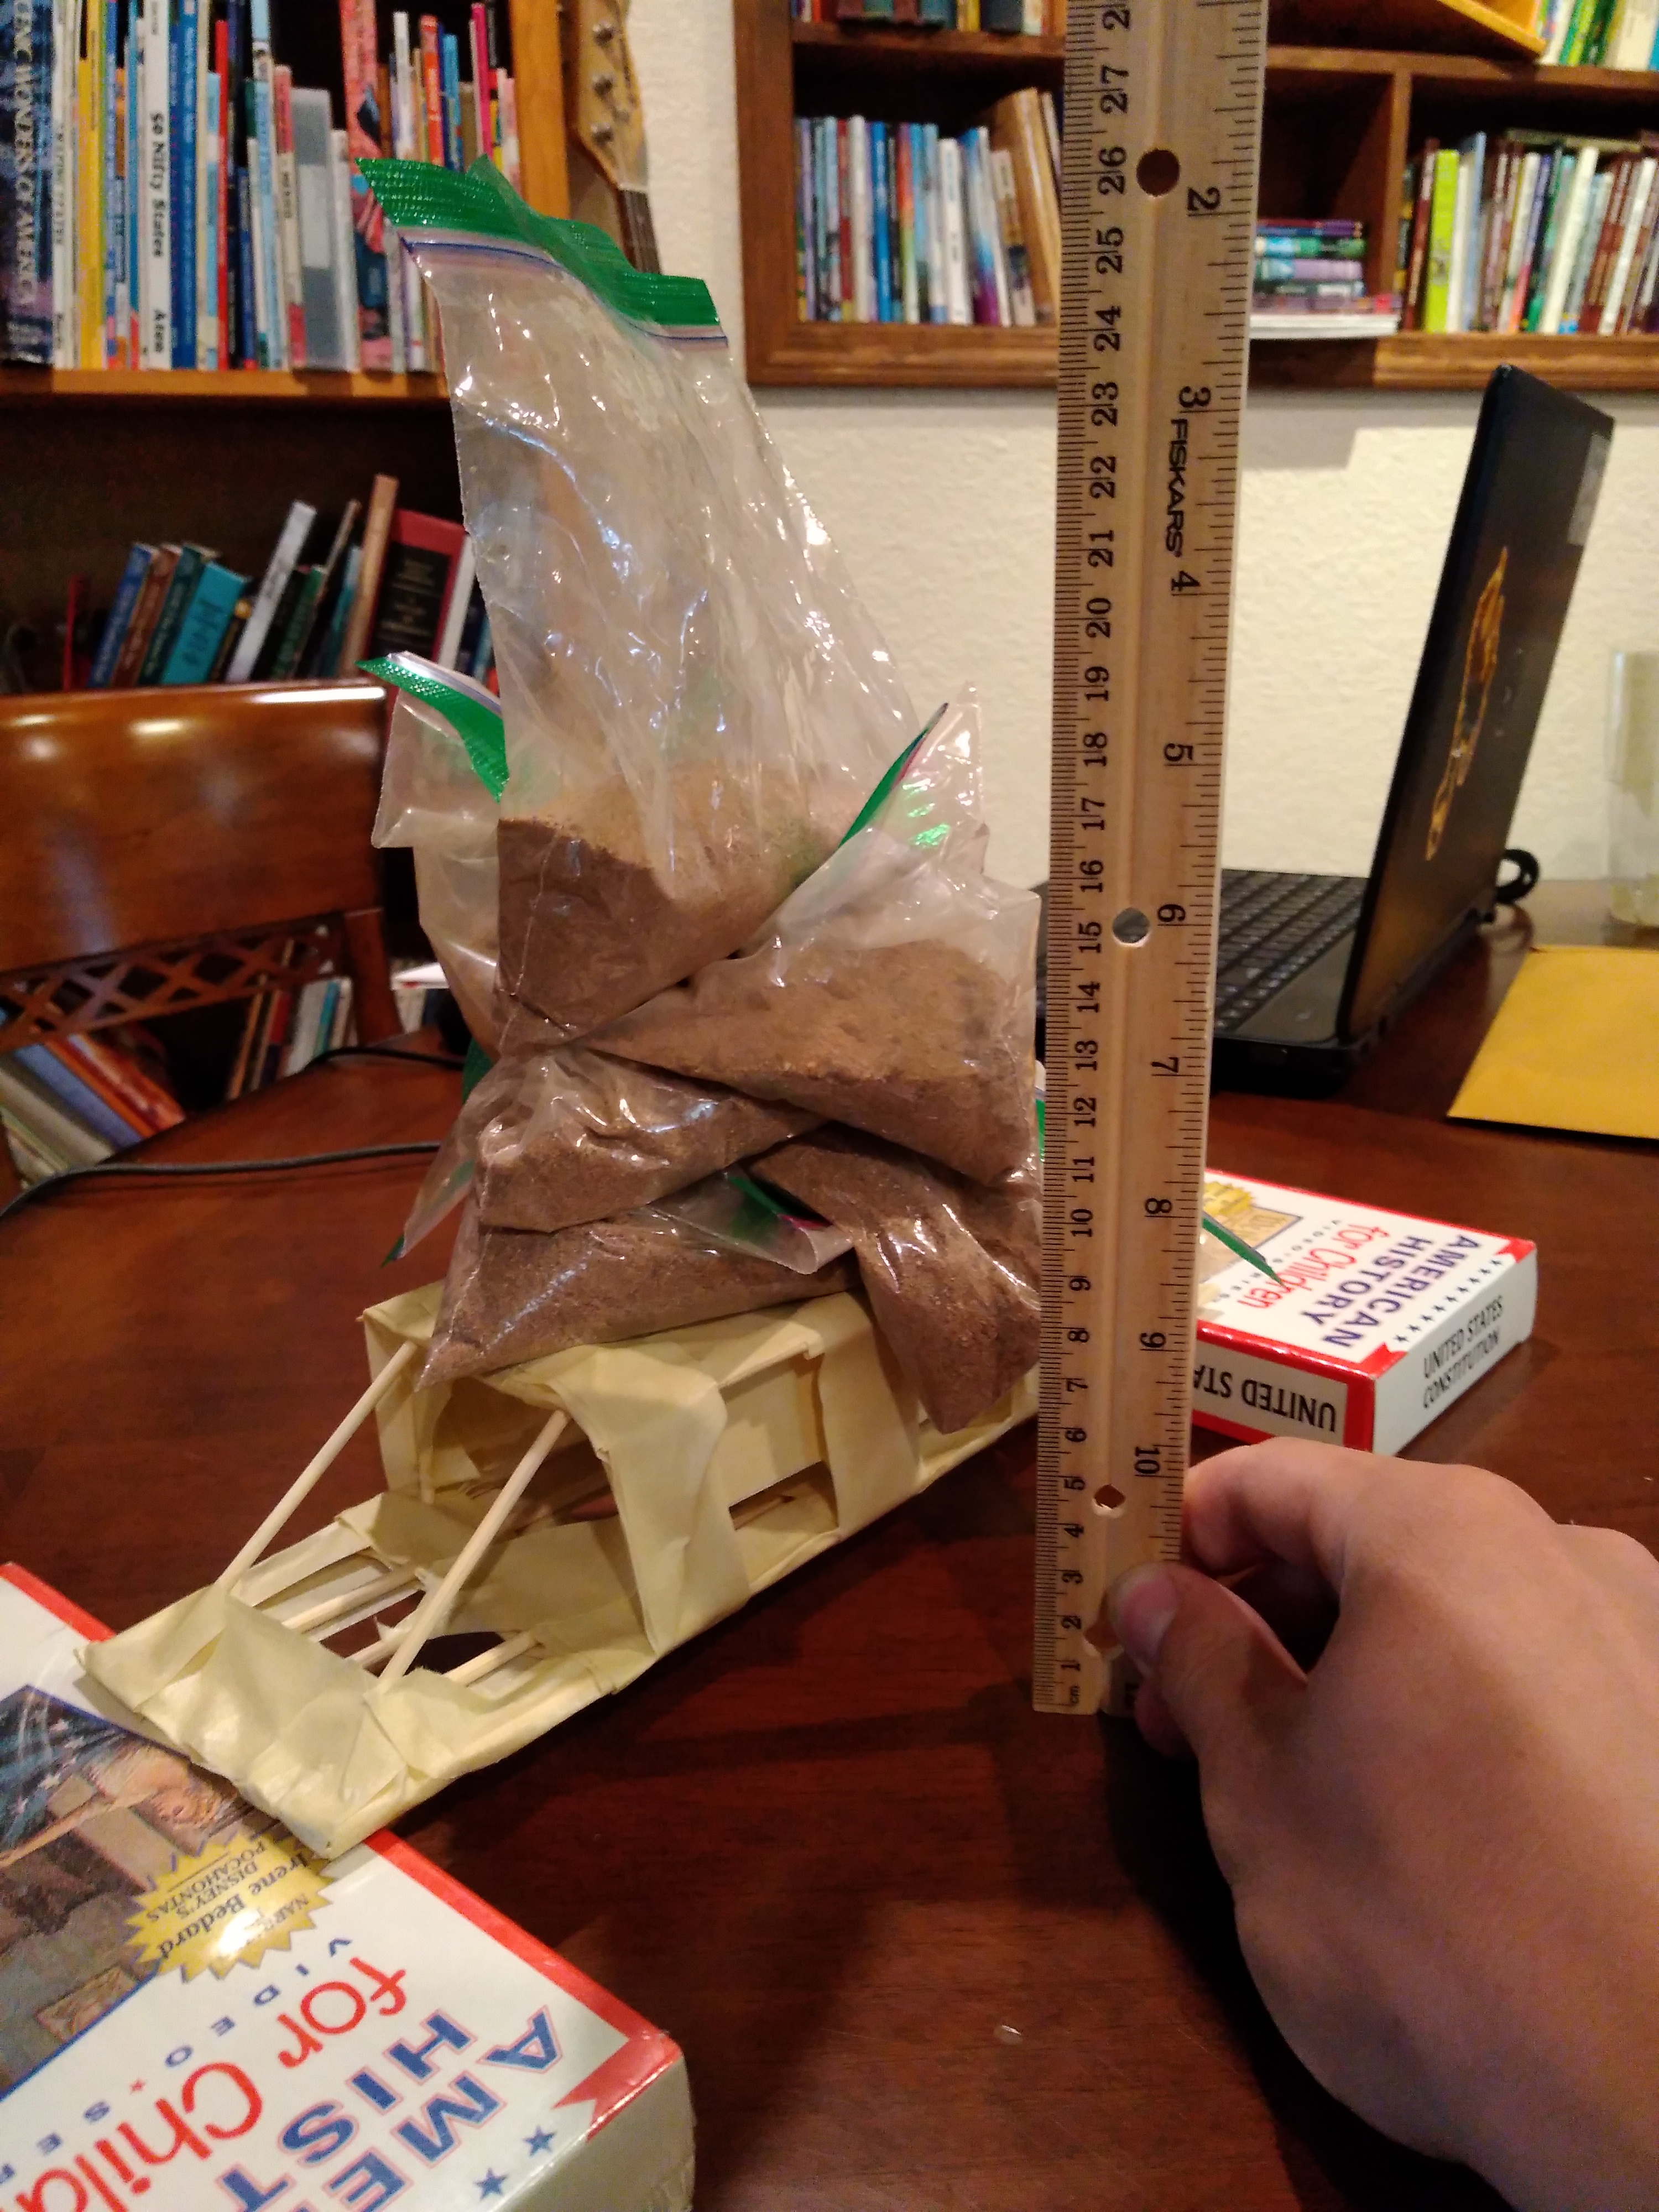 Bridge made from straws with sandbag weights to test